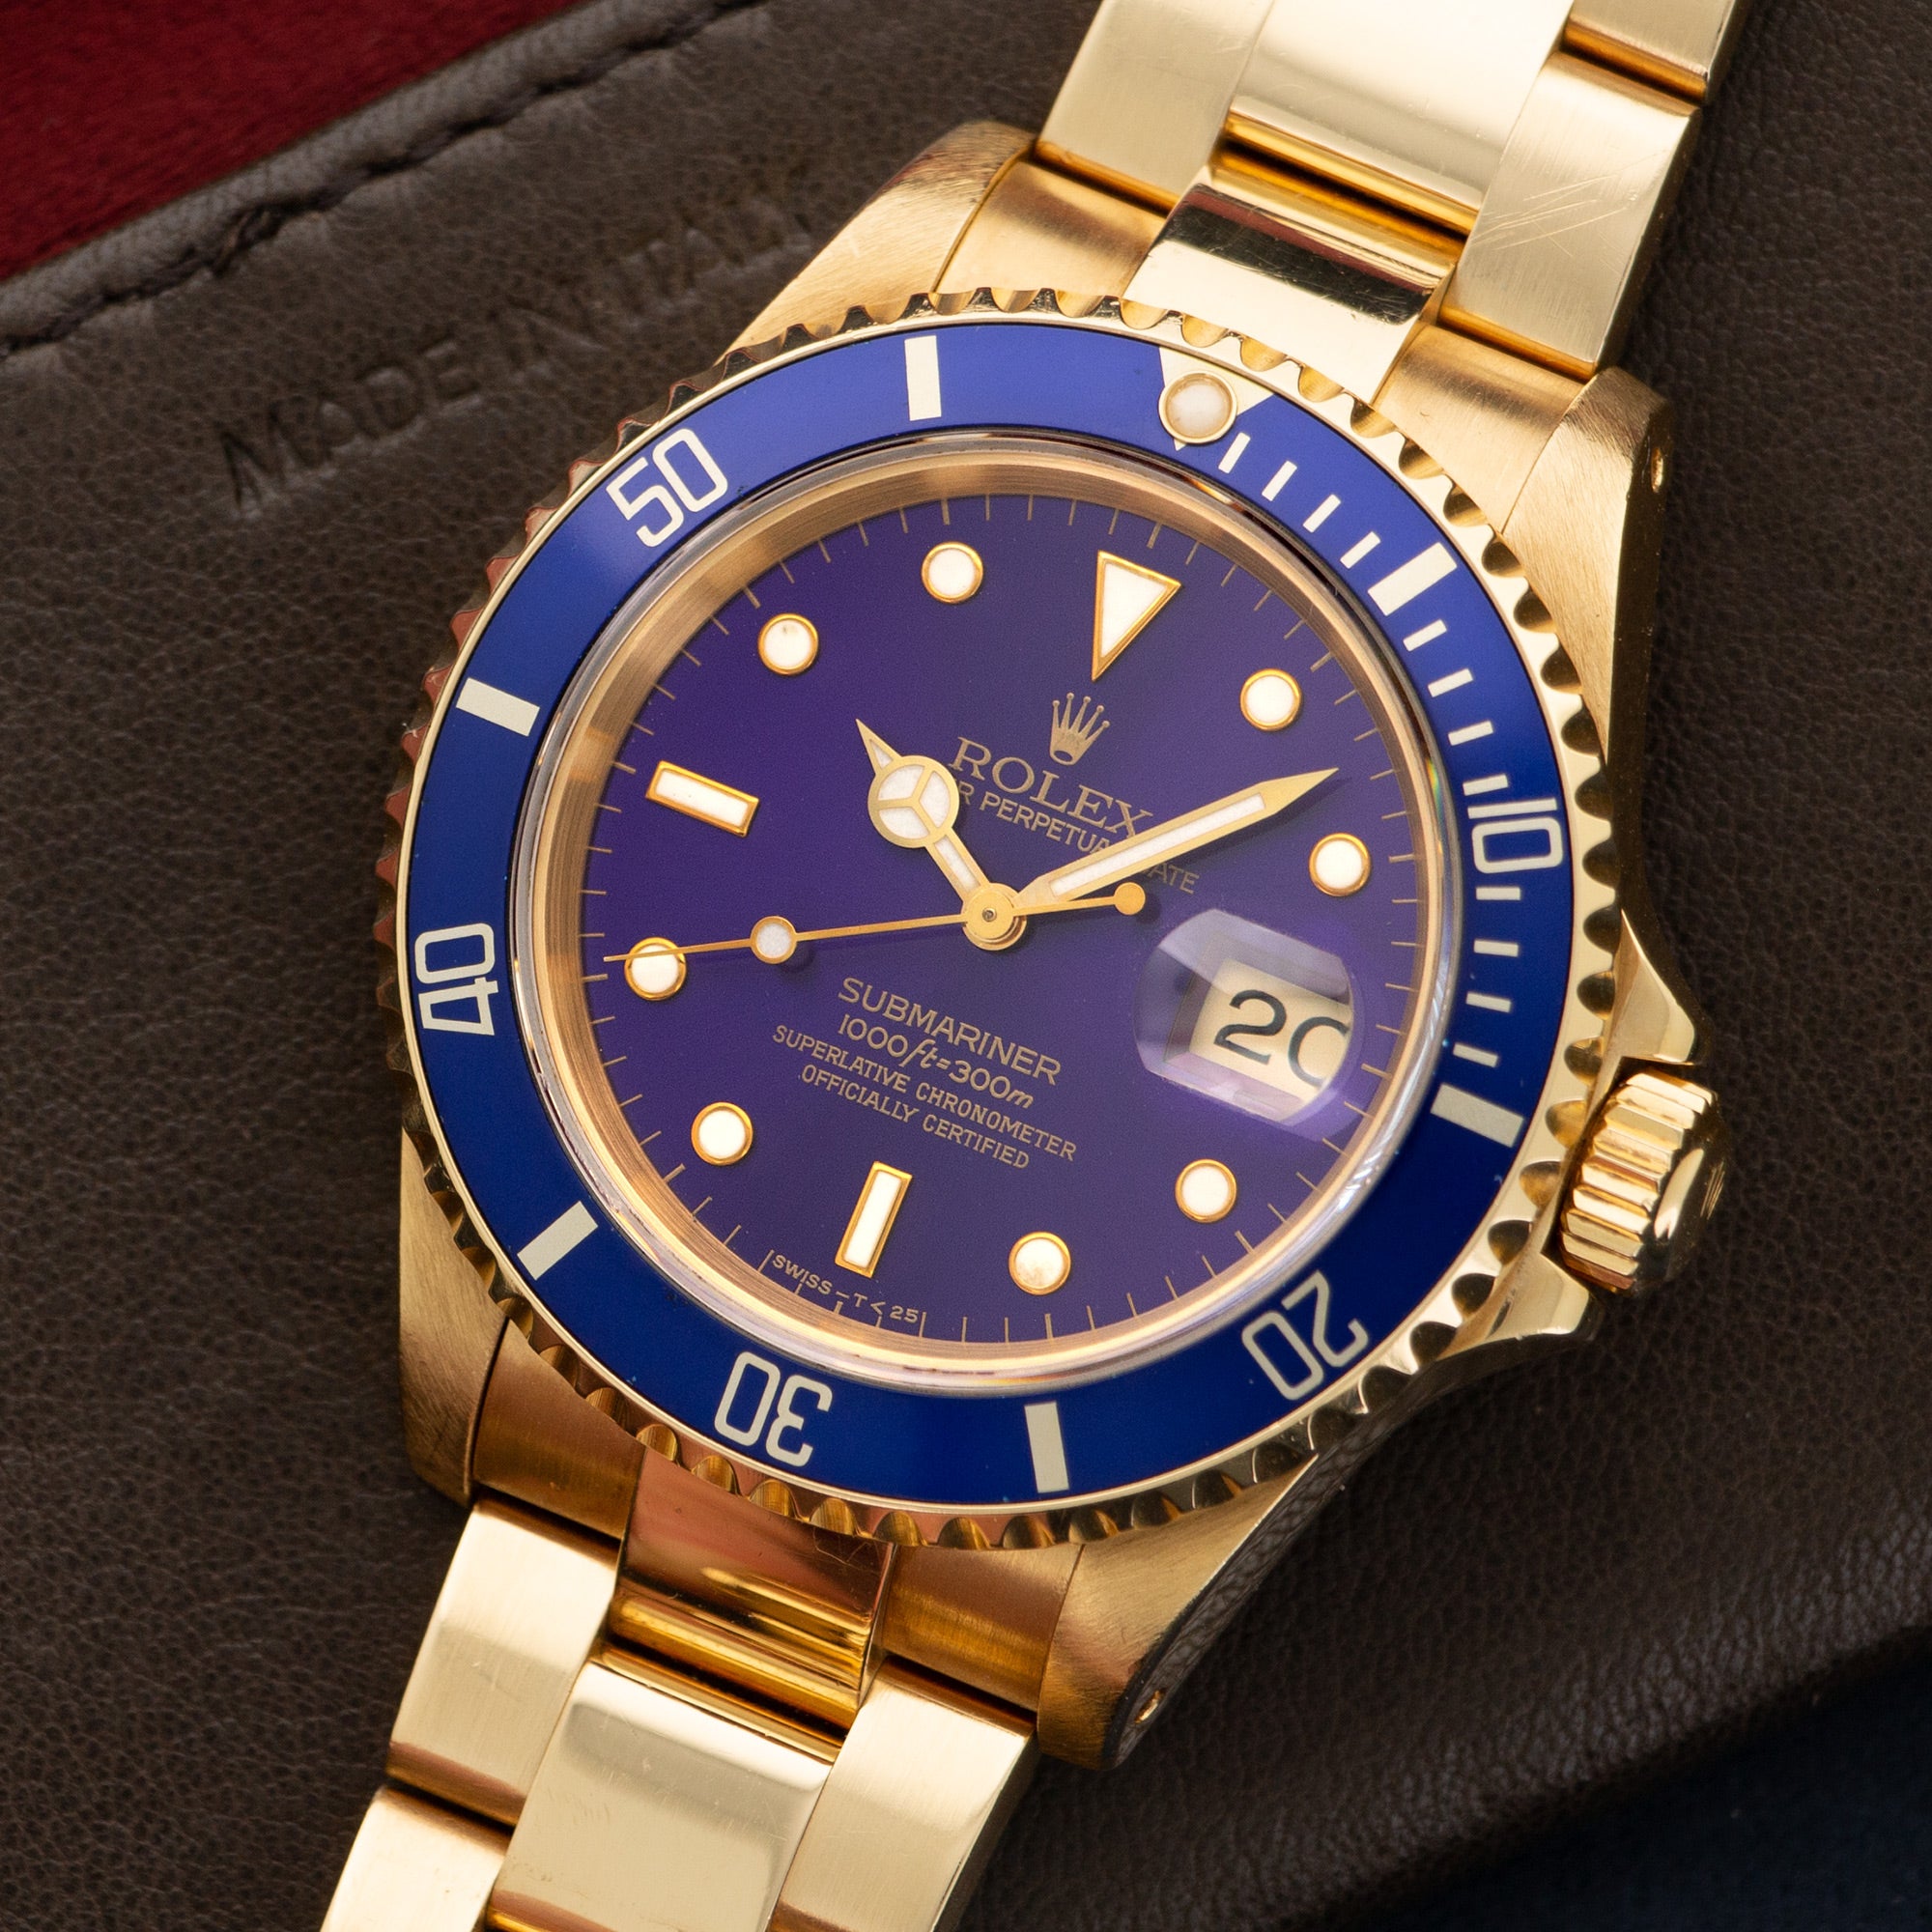 Rolex - Rolex Yellow Gold Submariner Watch Ref 16618 with Original Tropical Purple Dial - The Keystone Watches